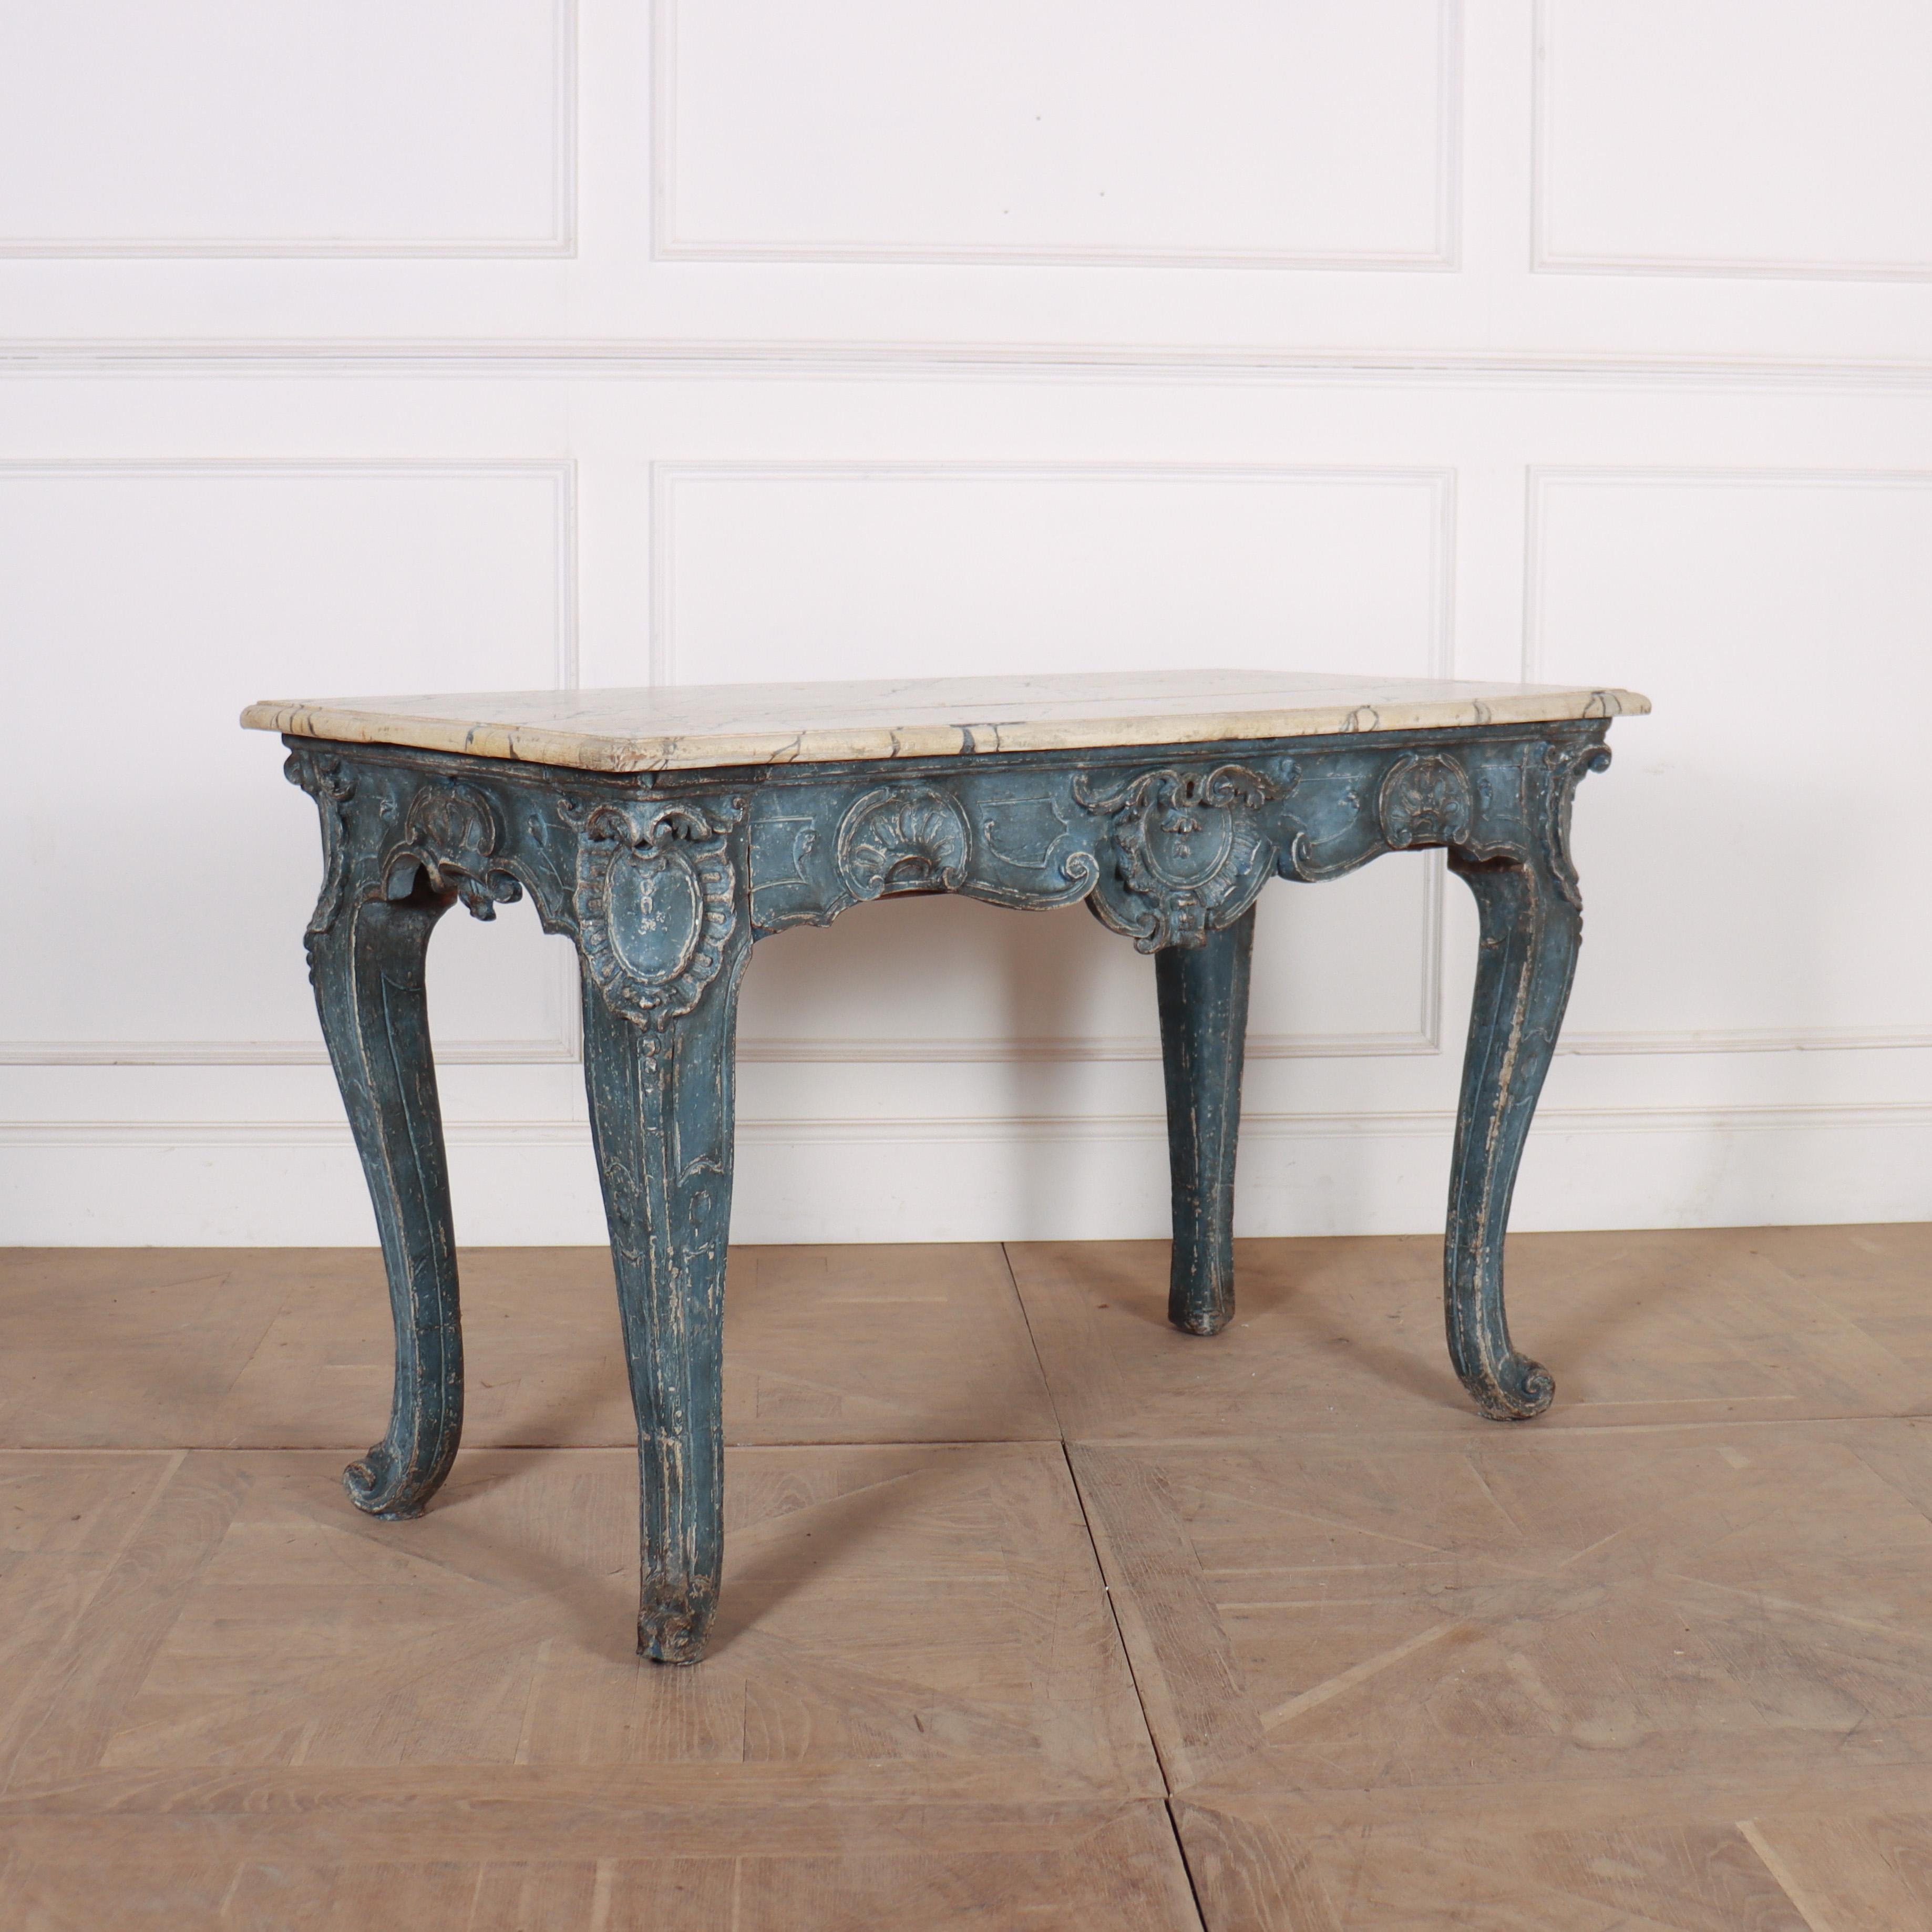 Wonderful 18th C Italian carved wood painted console table with a faux marble top. 1790.

Reference: 8018

Dimensions
51.5 inches (131 cms) Wide
25 inches (64 cms) Deep
31.5 inches (80 cms) High